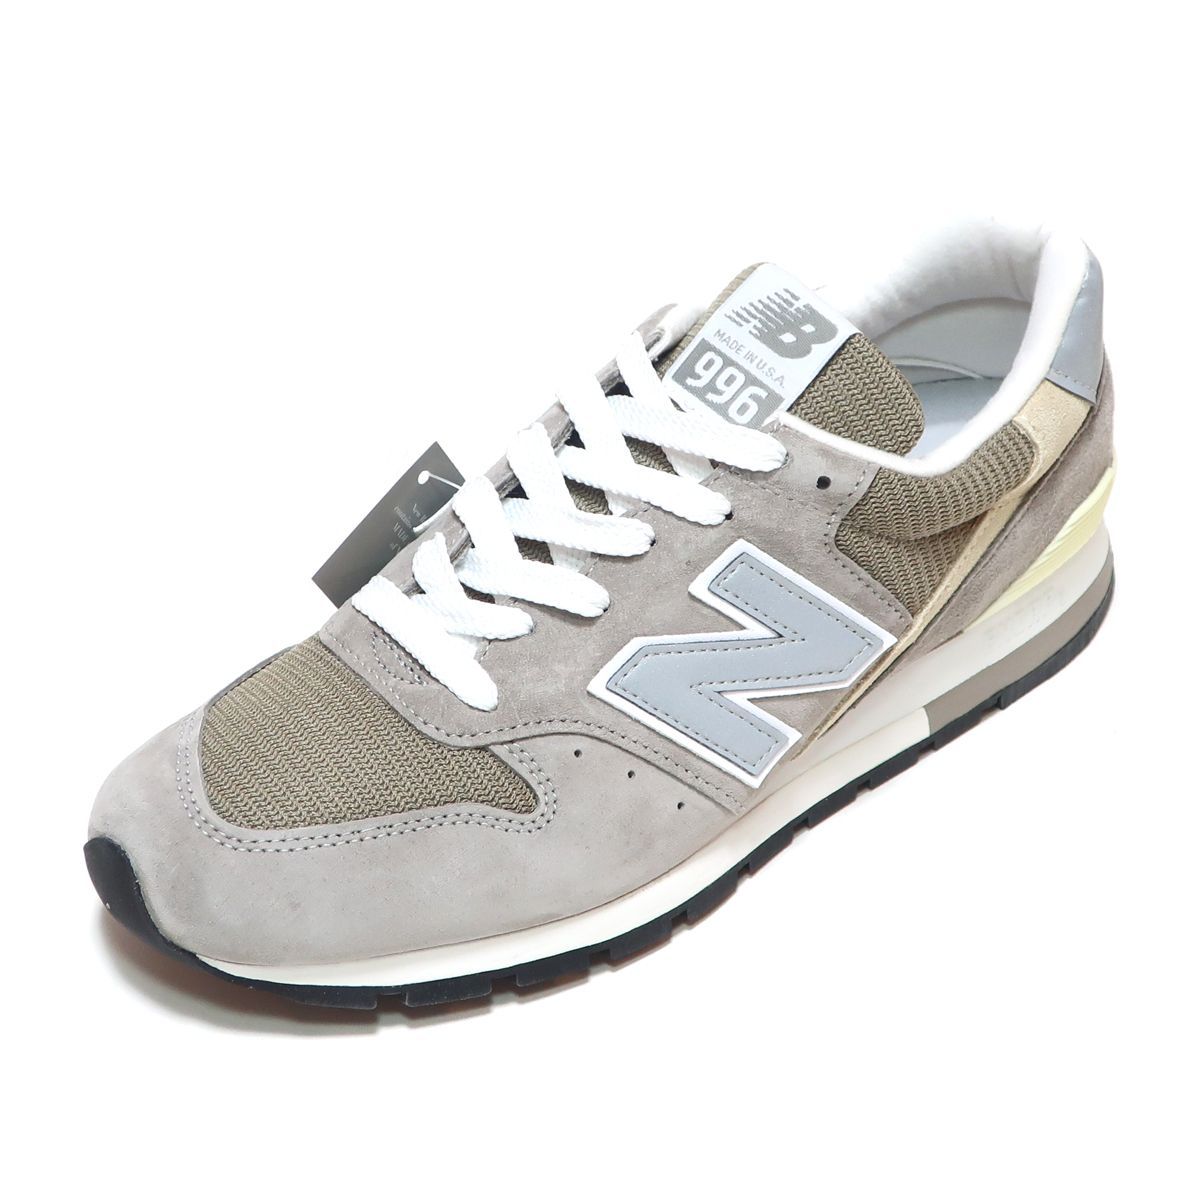 NEW BALANCE U996GR GRAY GREY SUEDE MADE IN USA ( ニューバランス 996 グレー スエード アメリカ製  )